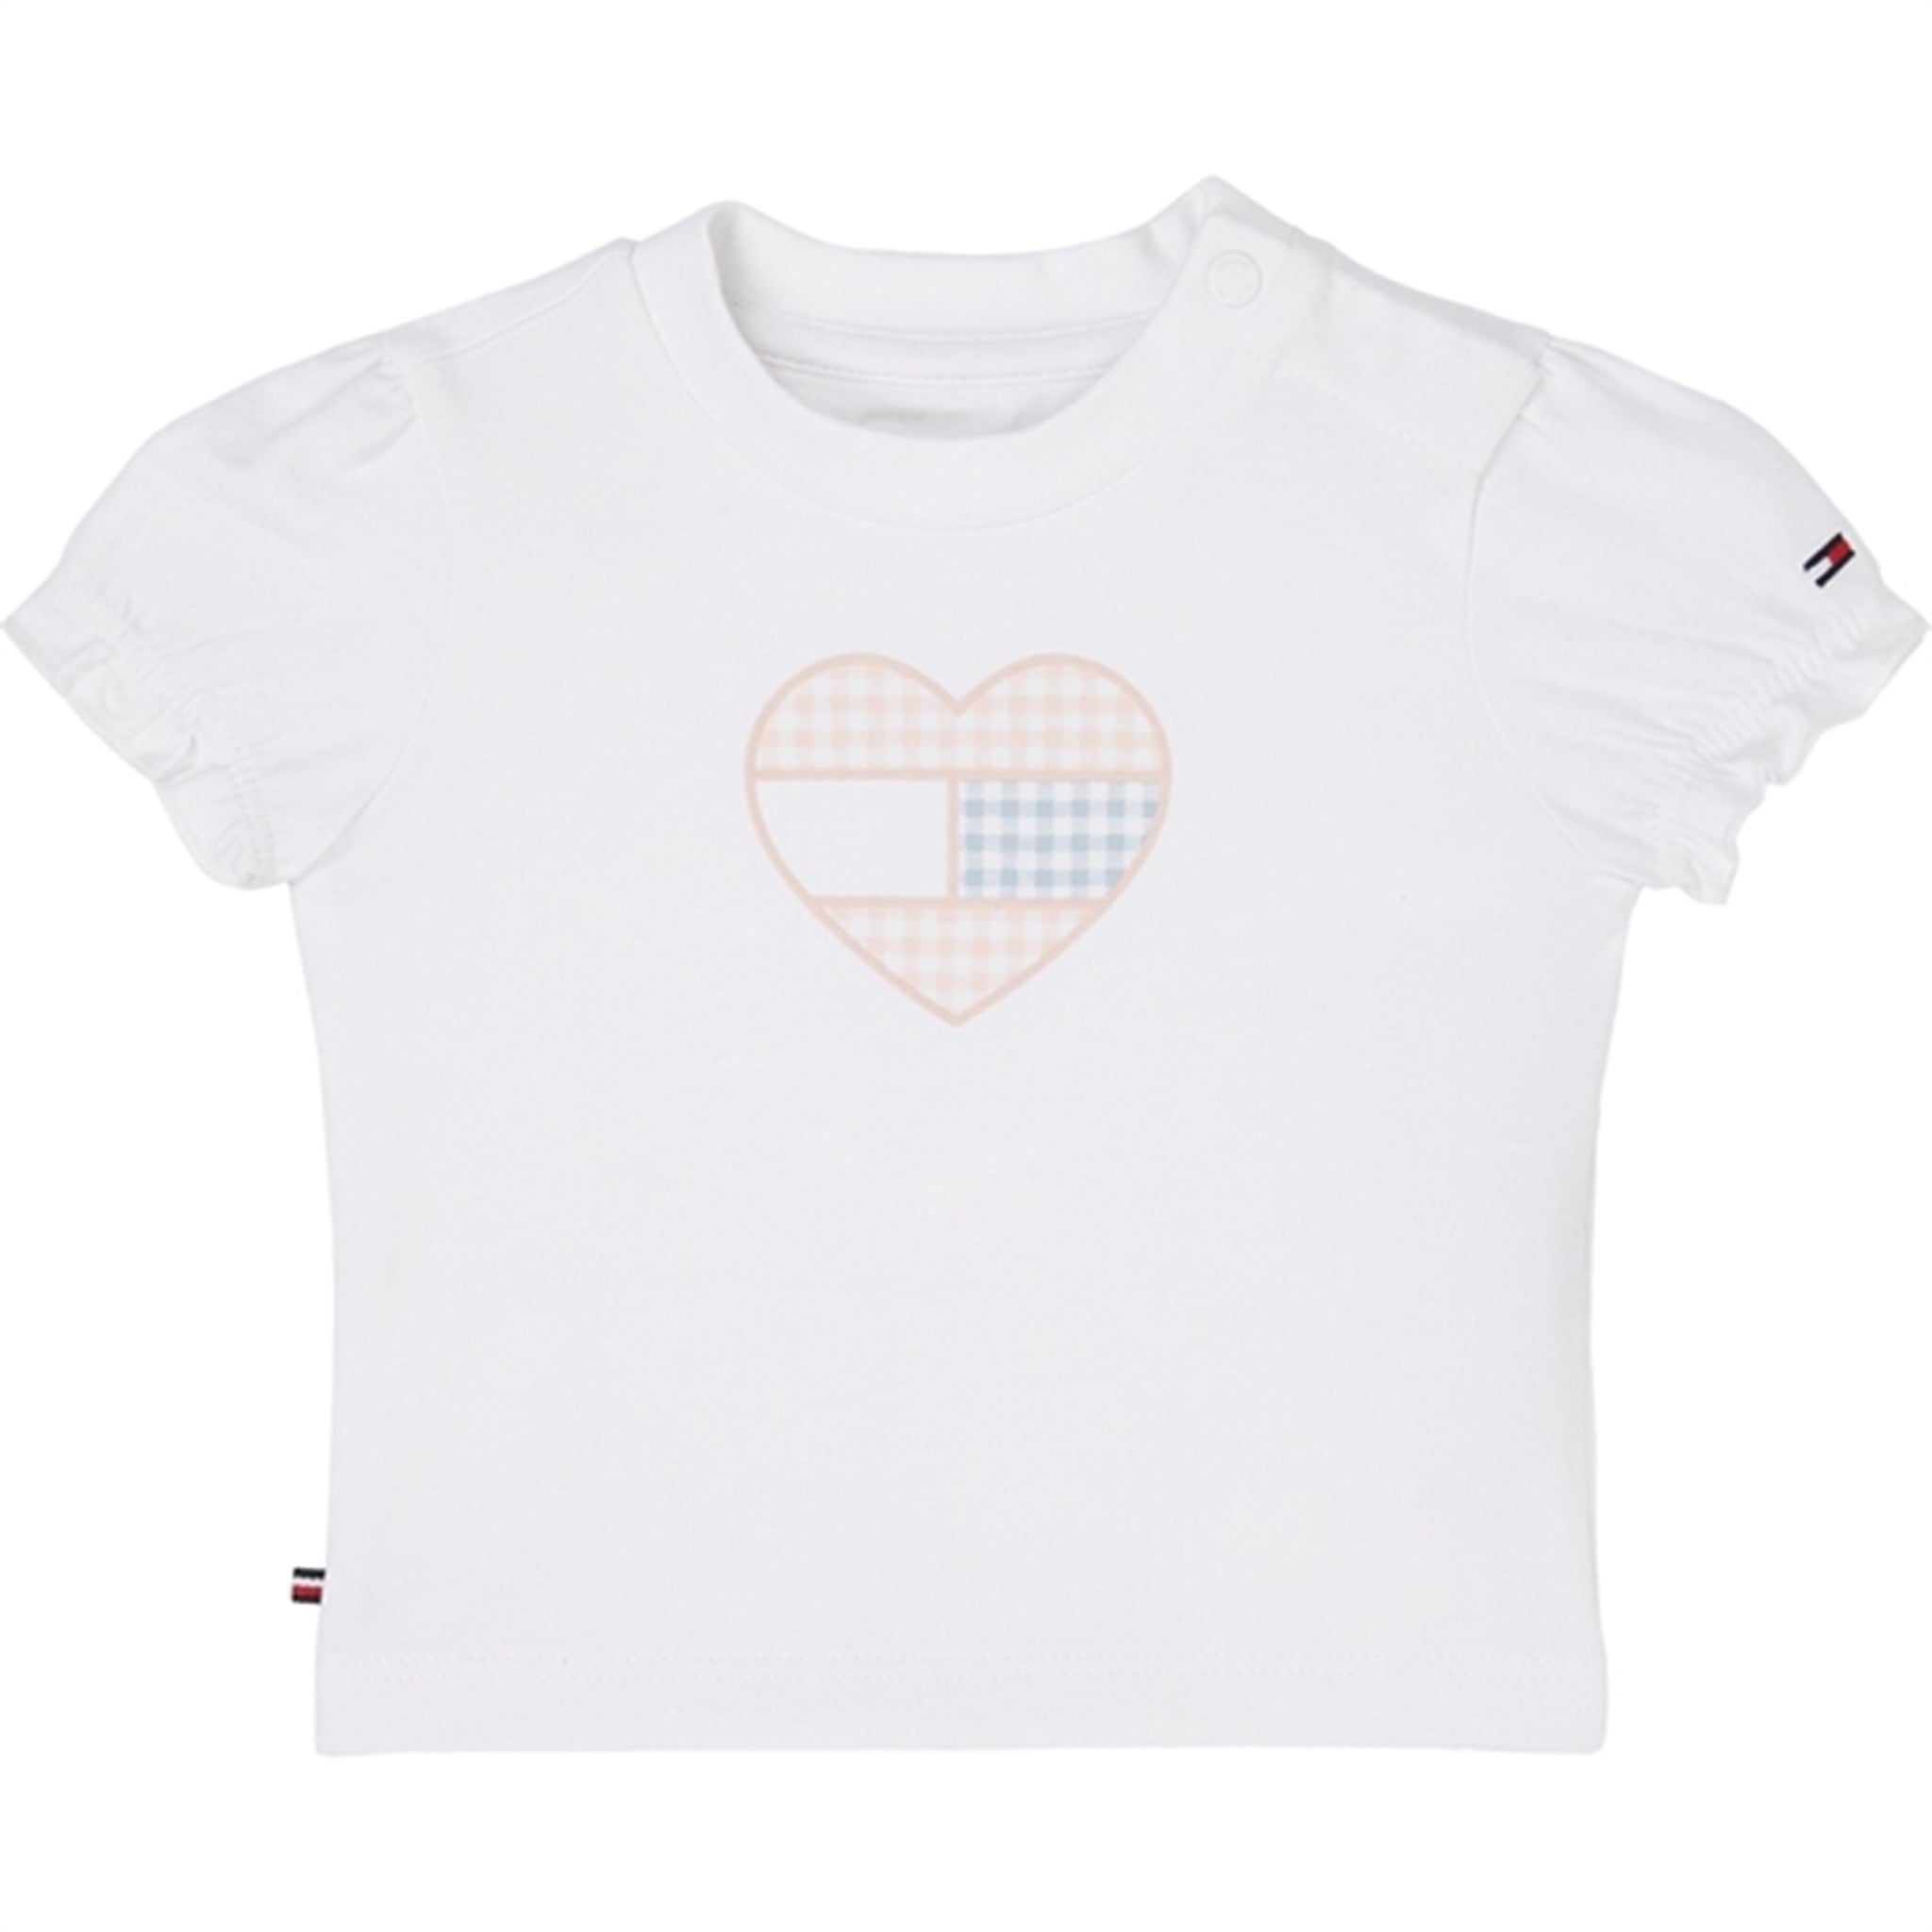 Tommy Hilfiger Baby Ruffle Gingham Flag T-Shirt White